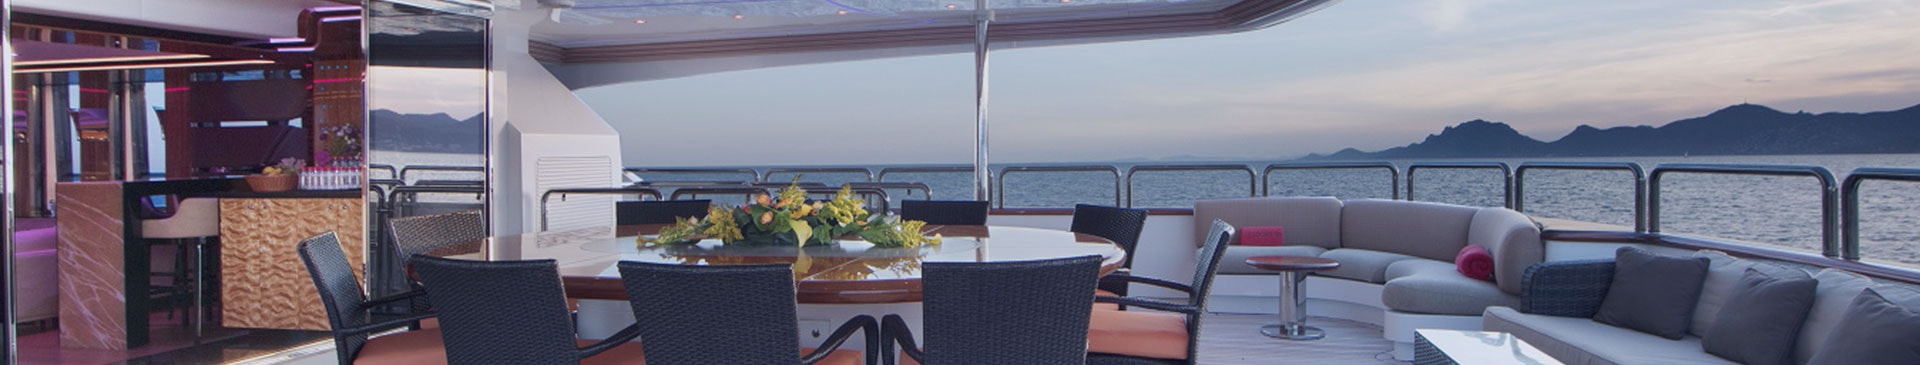 Make an Evening Unforgettable on the Deck of a Yacht